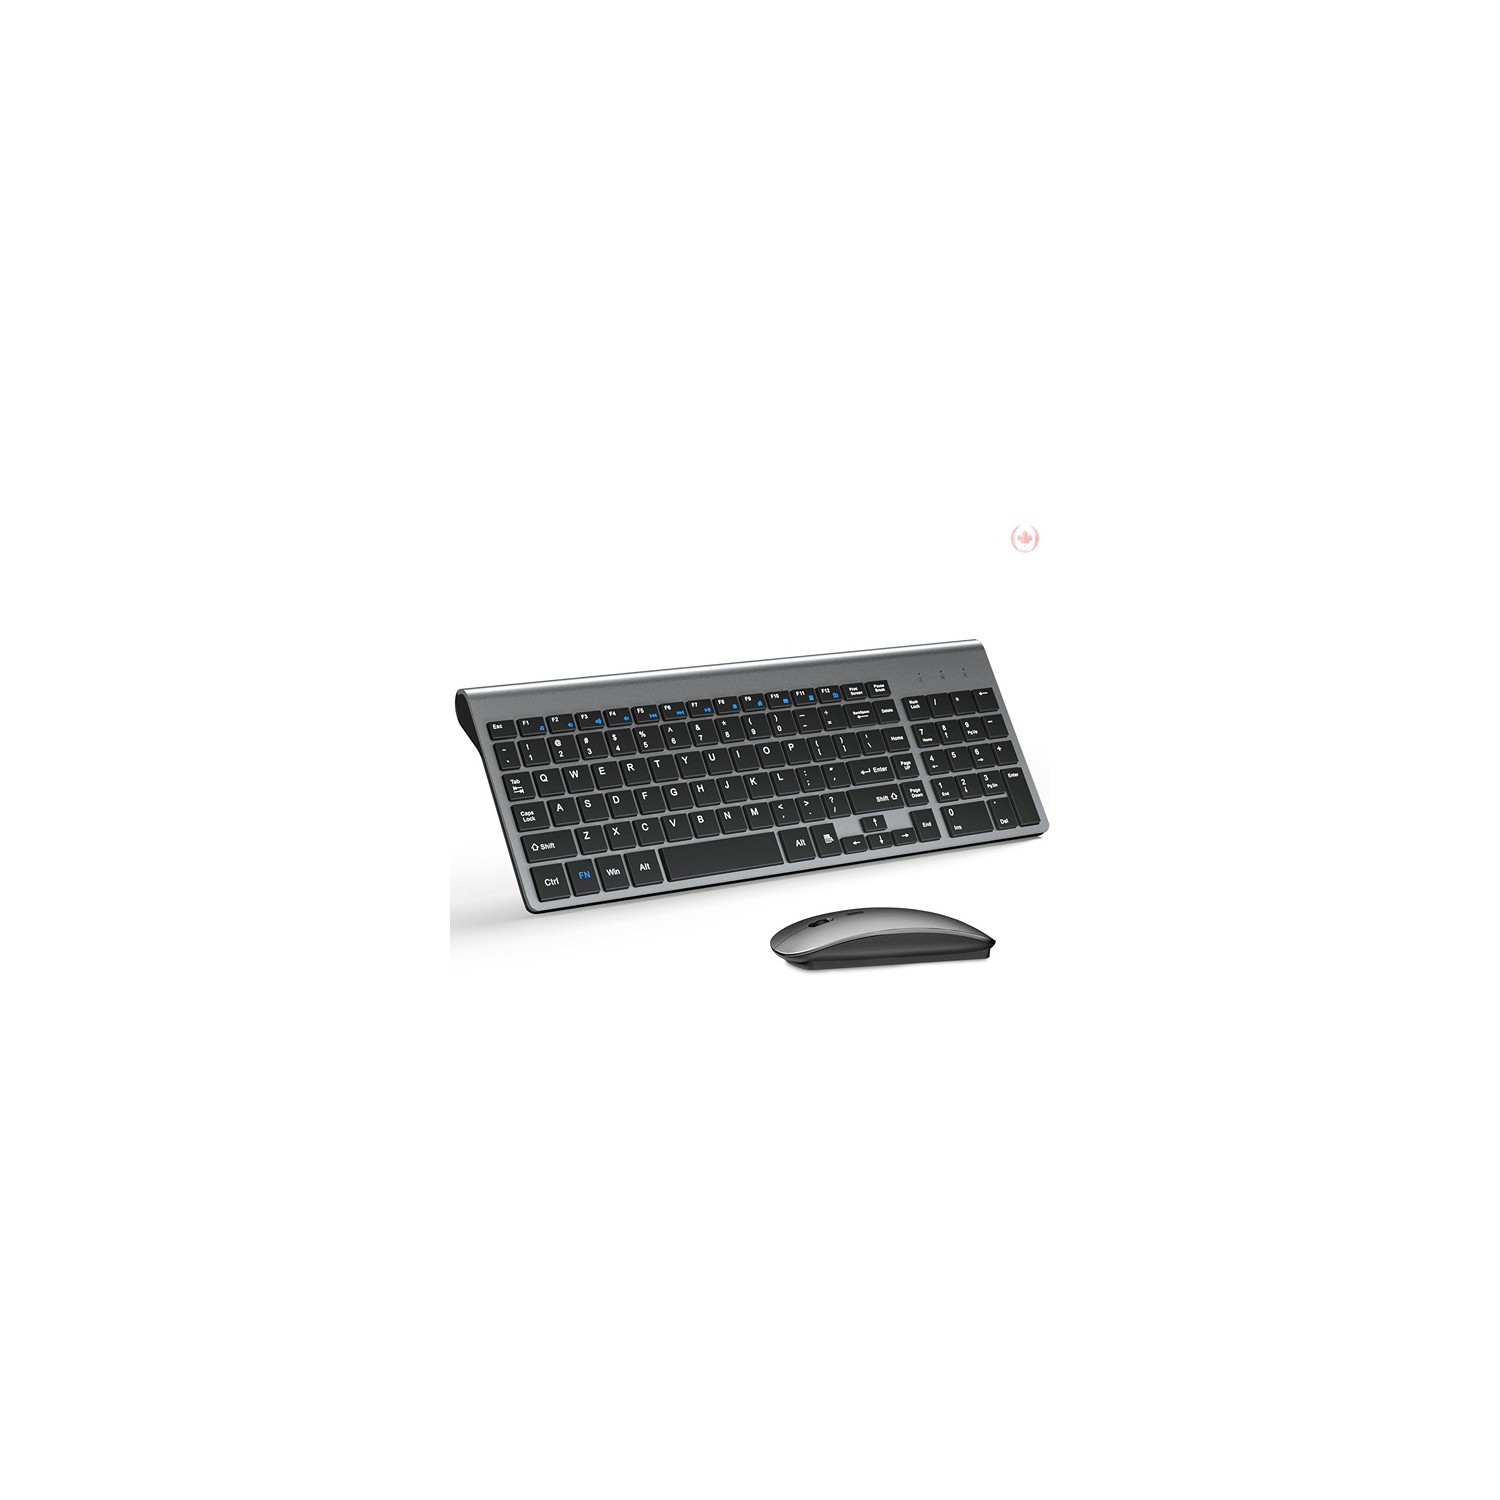 TopMate ‎39.5 x 14.8 x 4.4 cm Ultra Slim Wireless Keyboard and Mouse Set 2.4G Silent Compact Gary Black